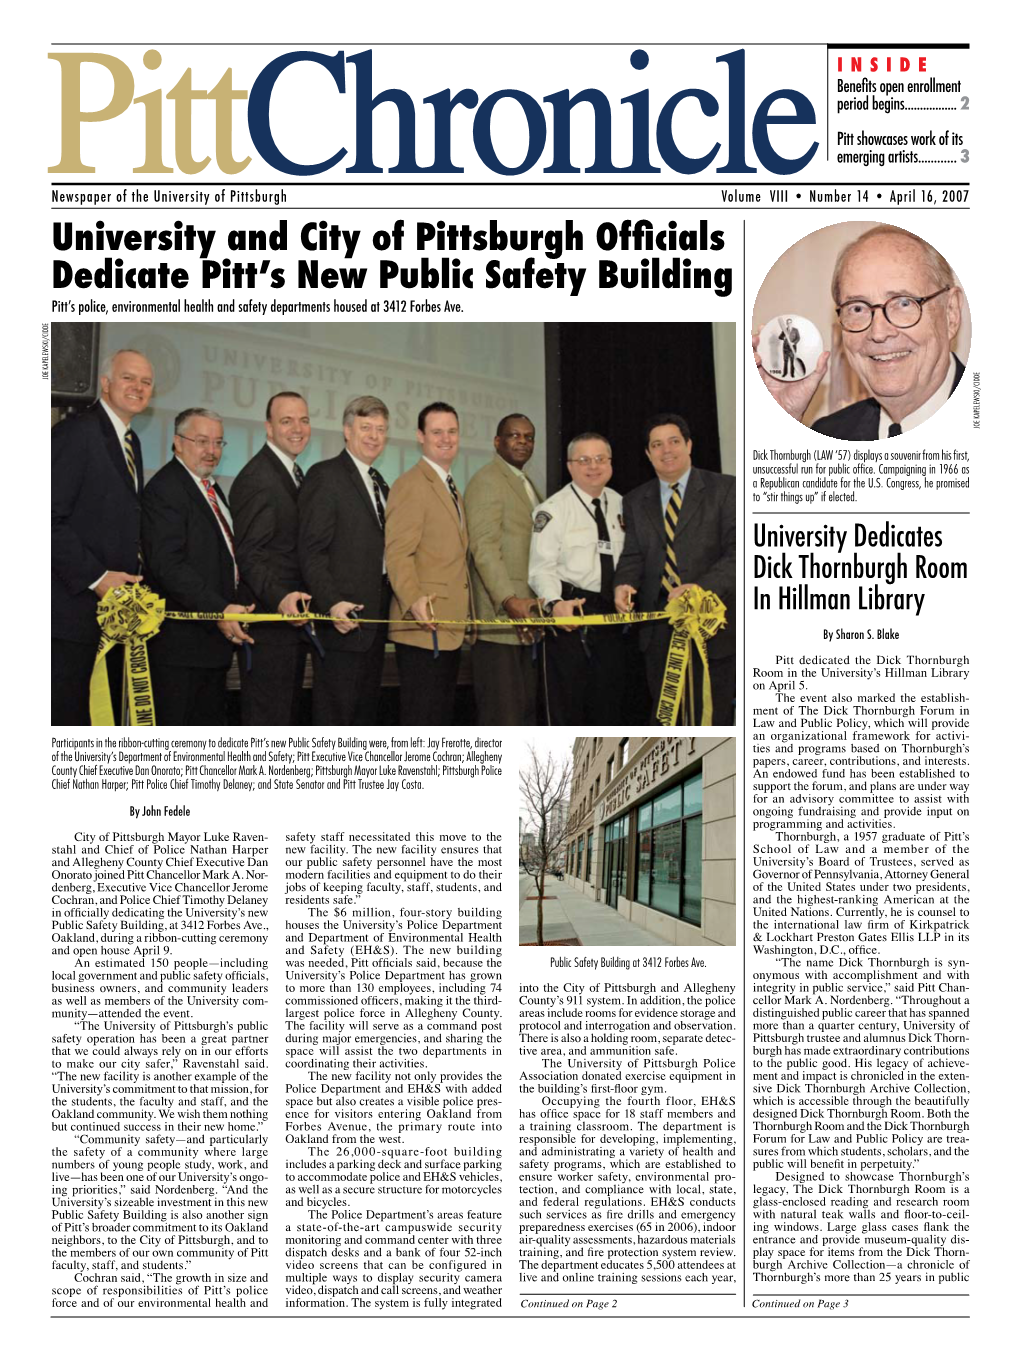 University and City of Pittsburgh Officials Dedicate Pitt's New Public